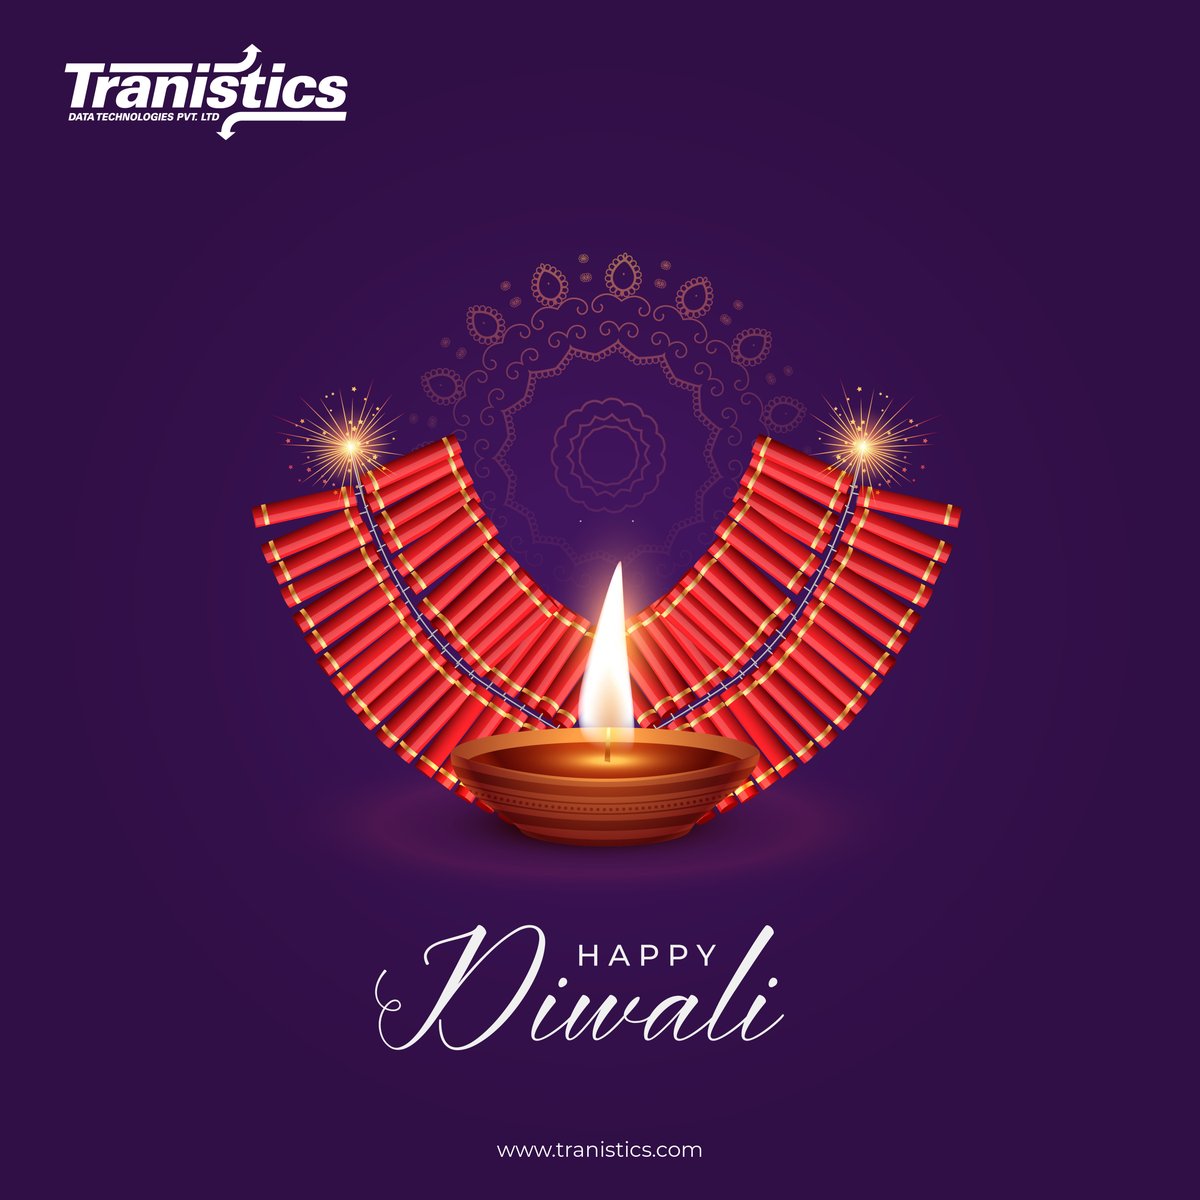 Light up your hearts and homes this Deepavali! Let the festivities shine through and bring joy to every corner of our lives! #tranistics #trustedbusinesspartner #logistics #publishing